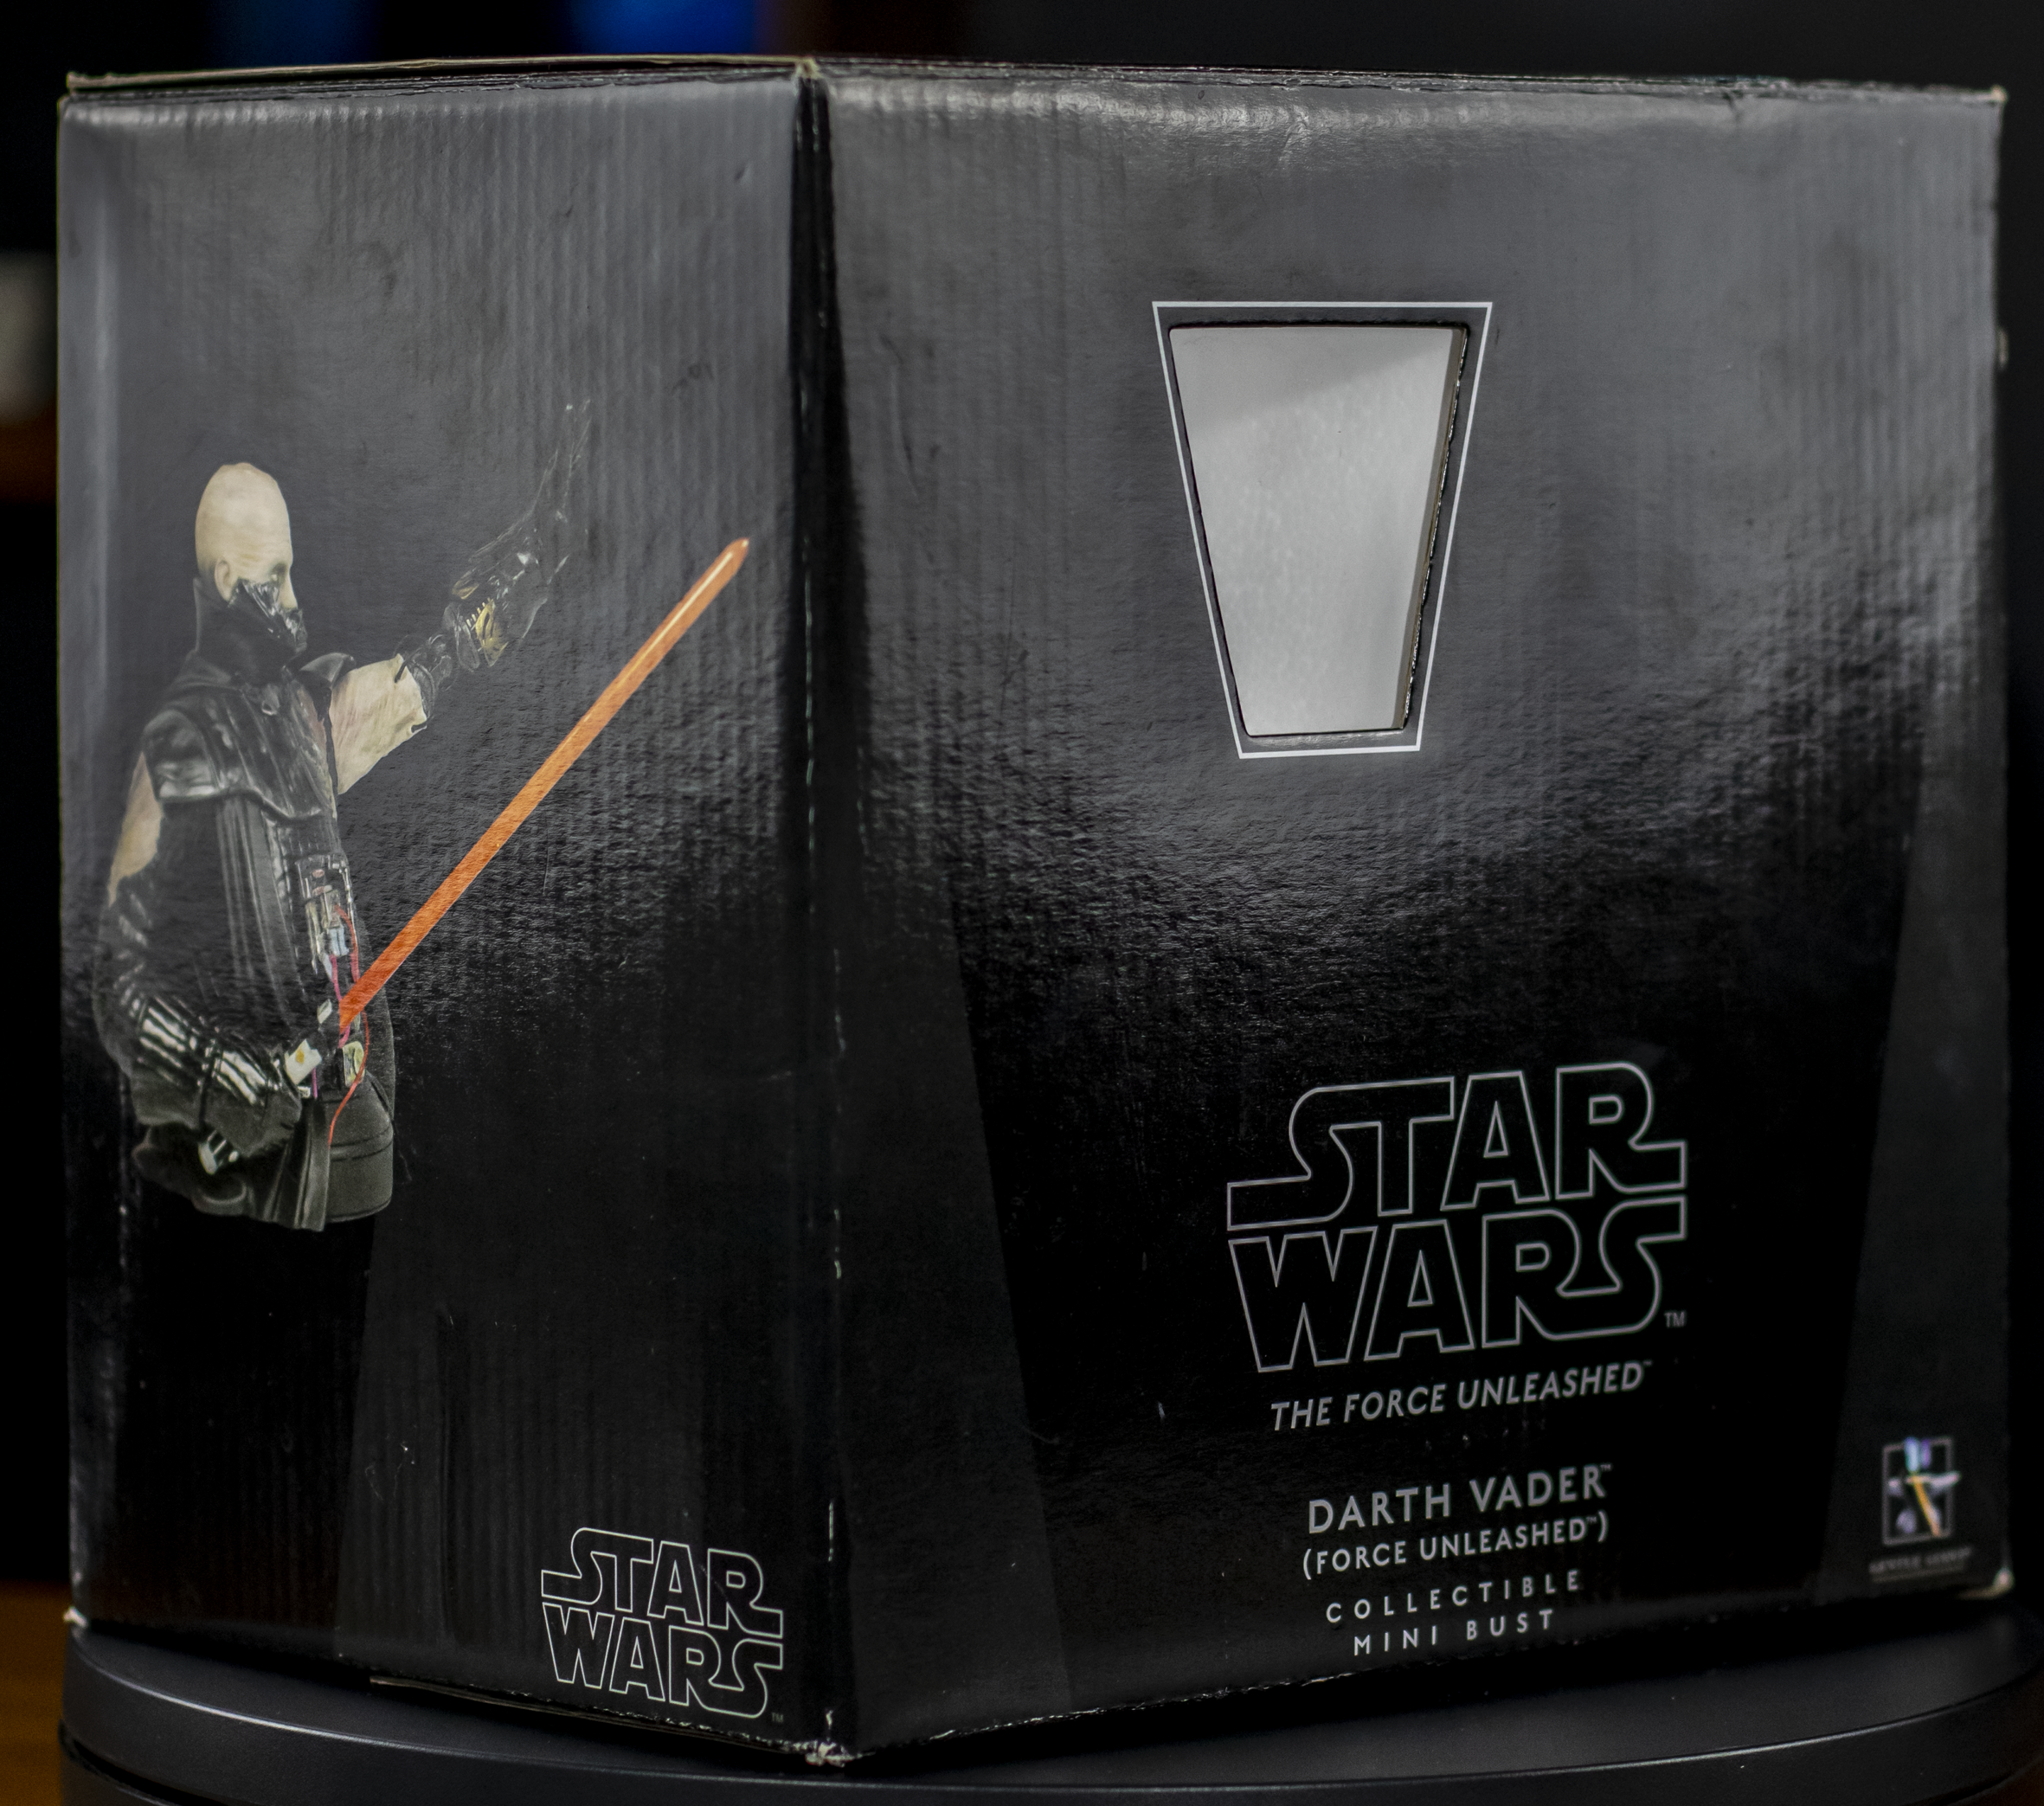 Star Wars: The Force Unleashed "Darth Vader" Collectible Mini Bust